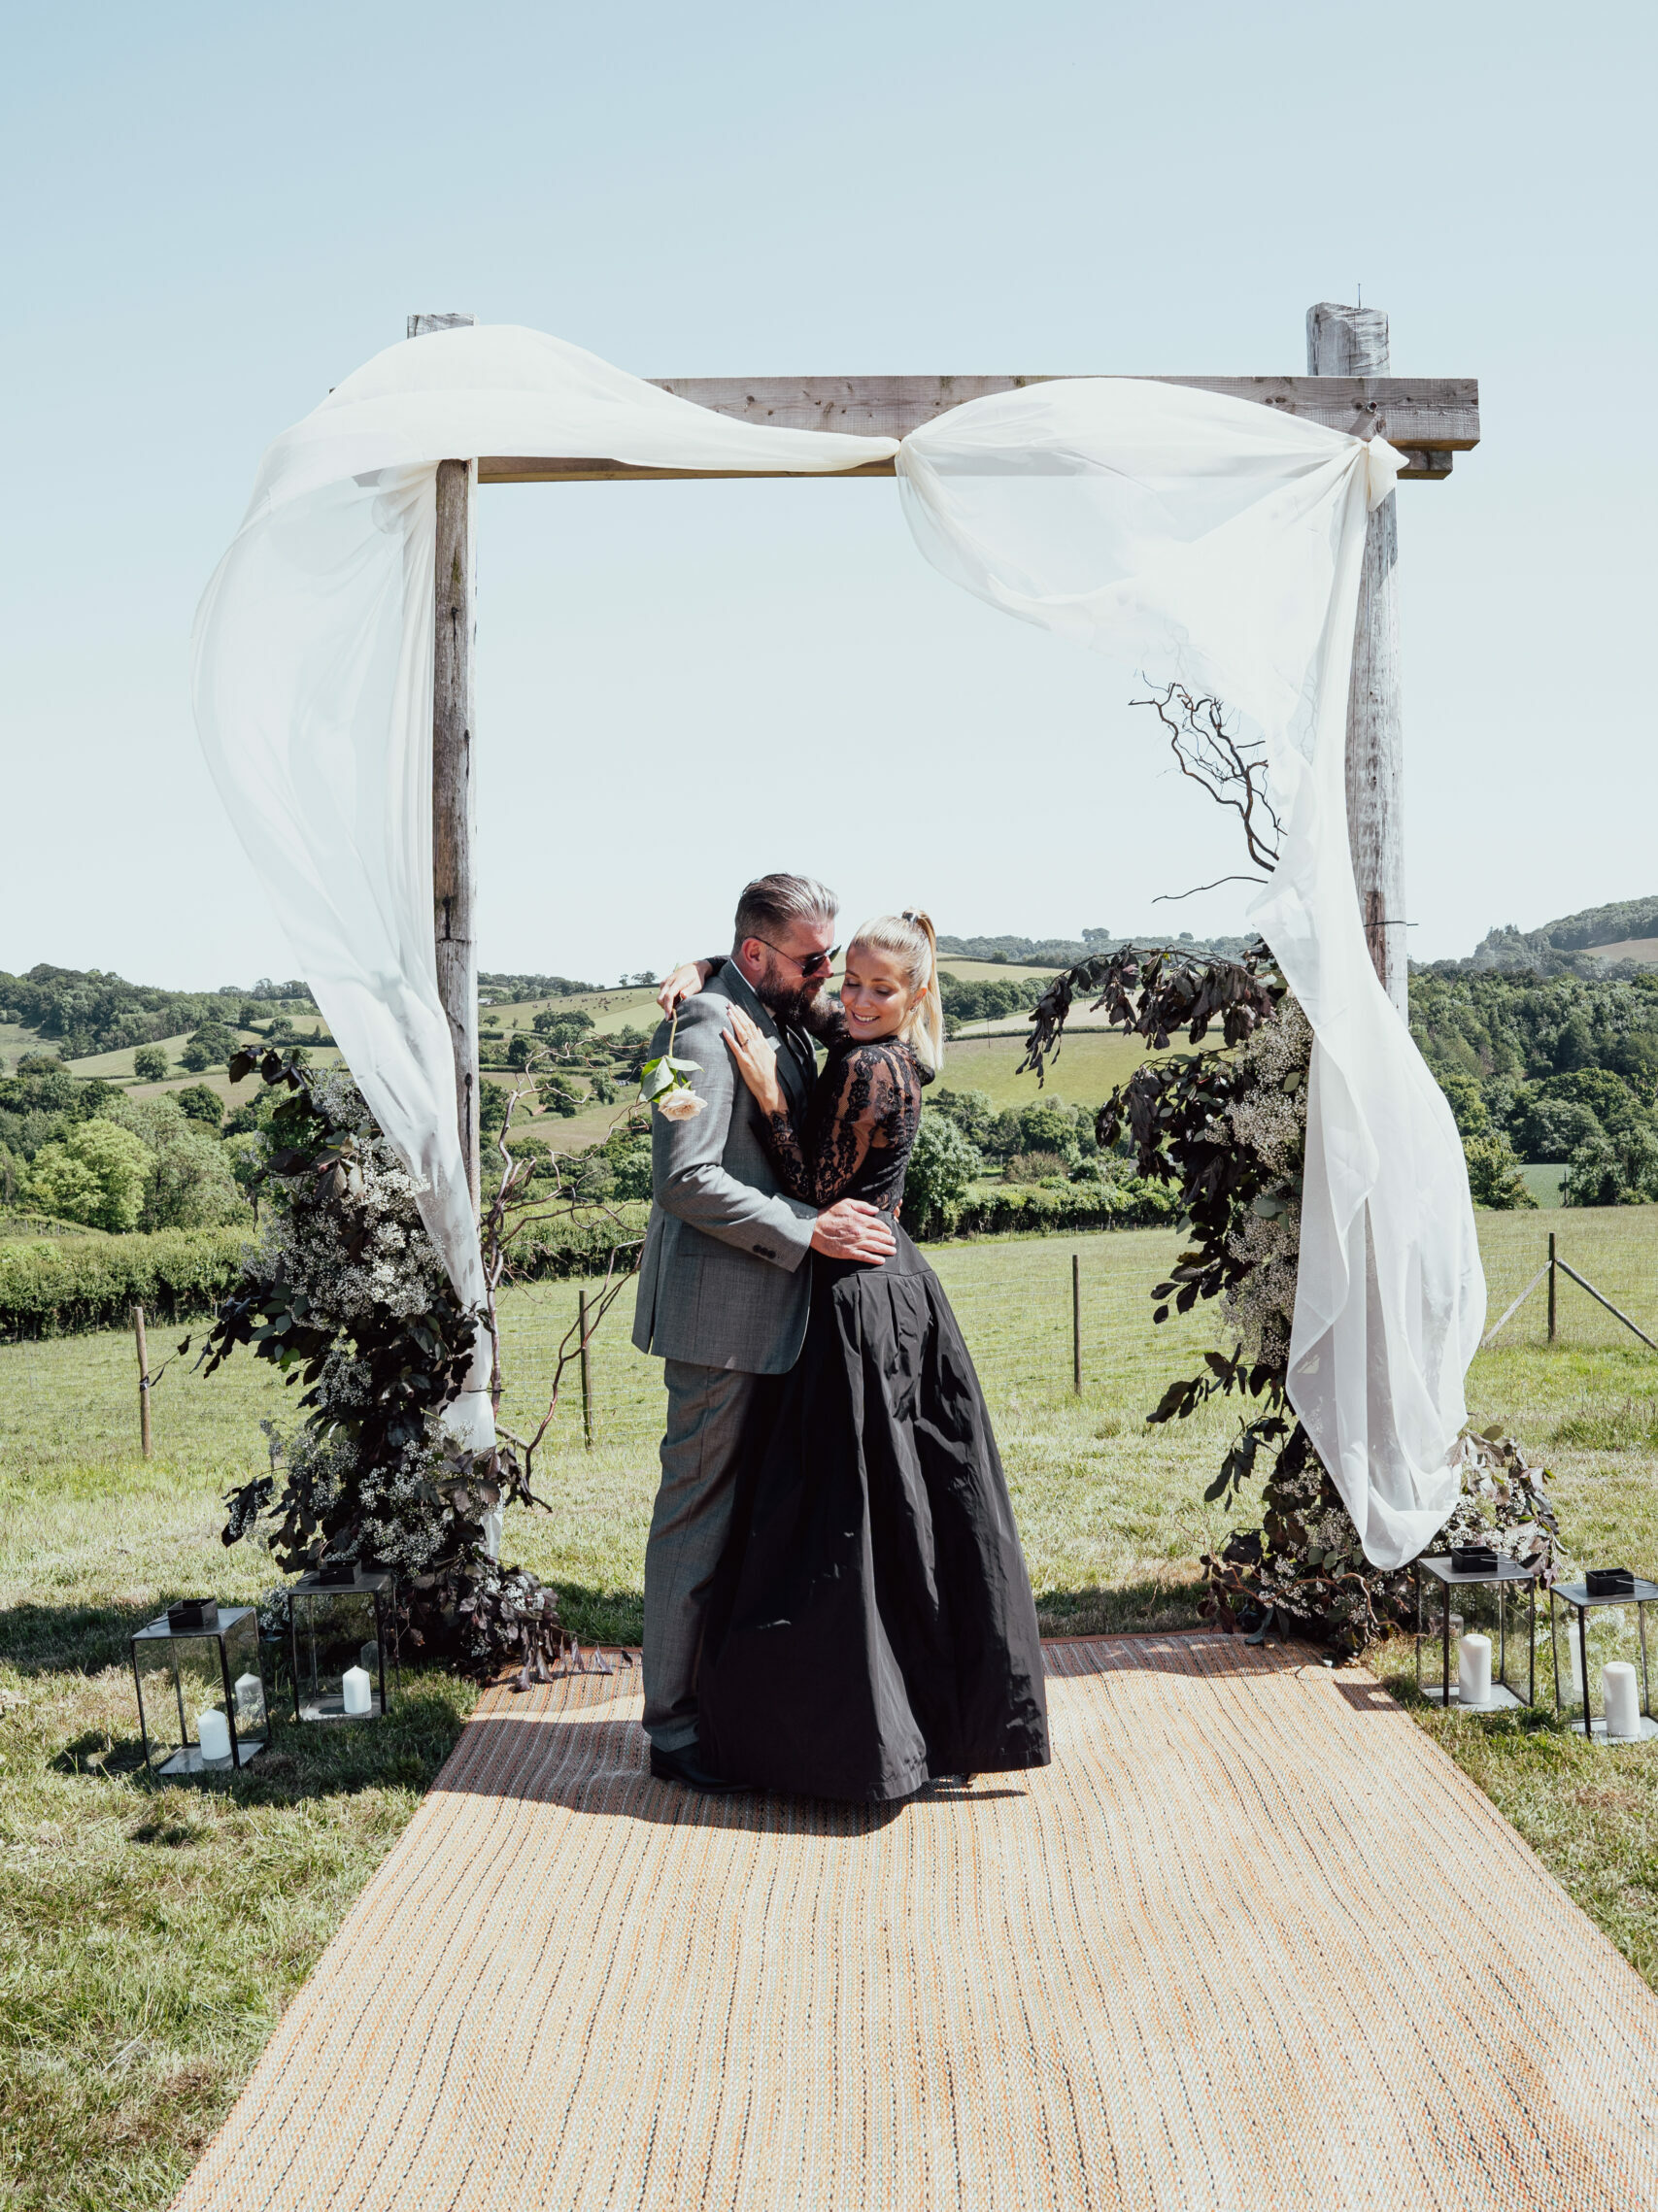 A bride and groom stand before a stunning wedding arch adorned with white drapes and modern black and white decor and flowers. The groom looks smart in a grey suit, while the bride is a vision of elegance in her long-sleeved black lace wedding dress. The backdrop features the rolling hills of Devon.